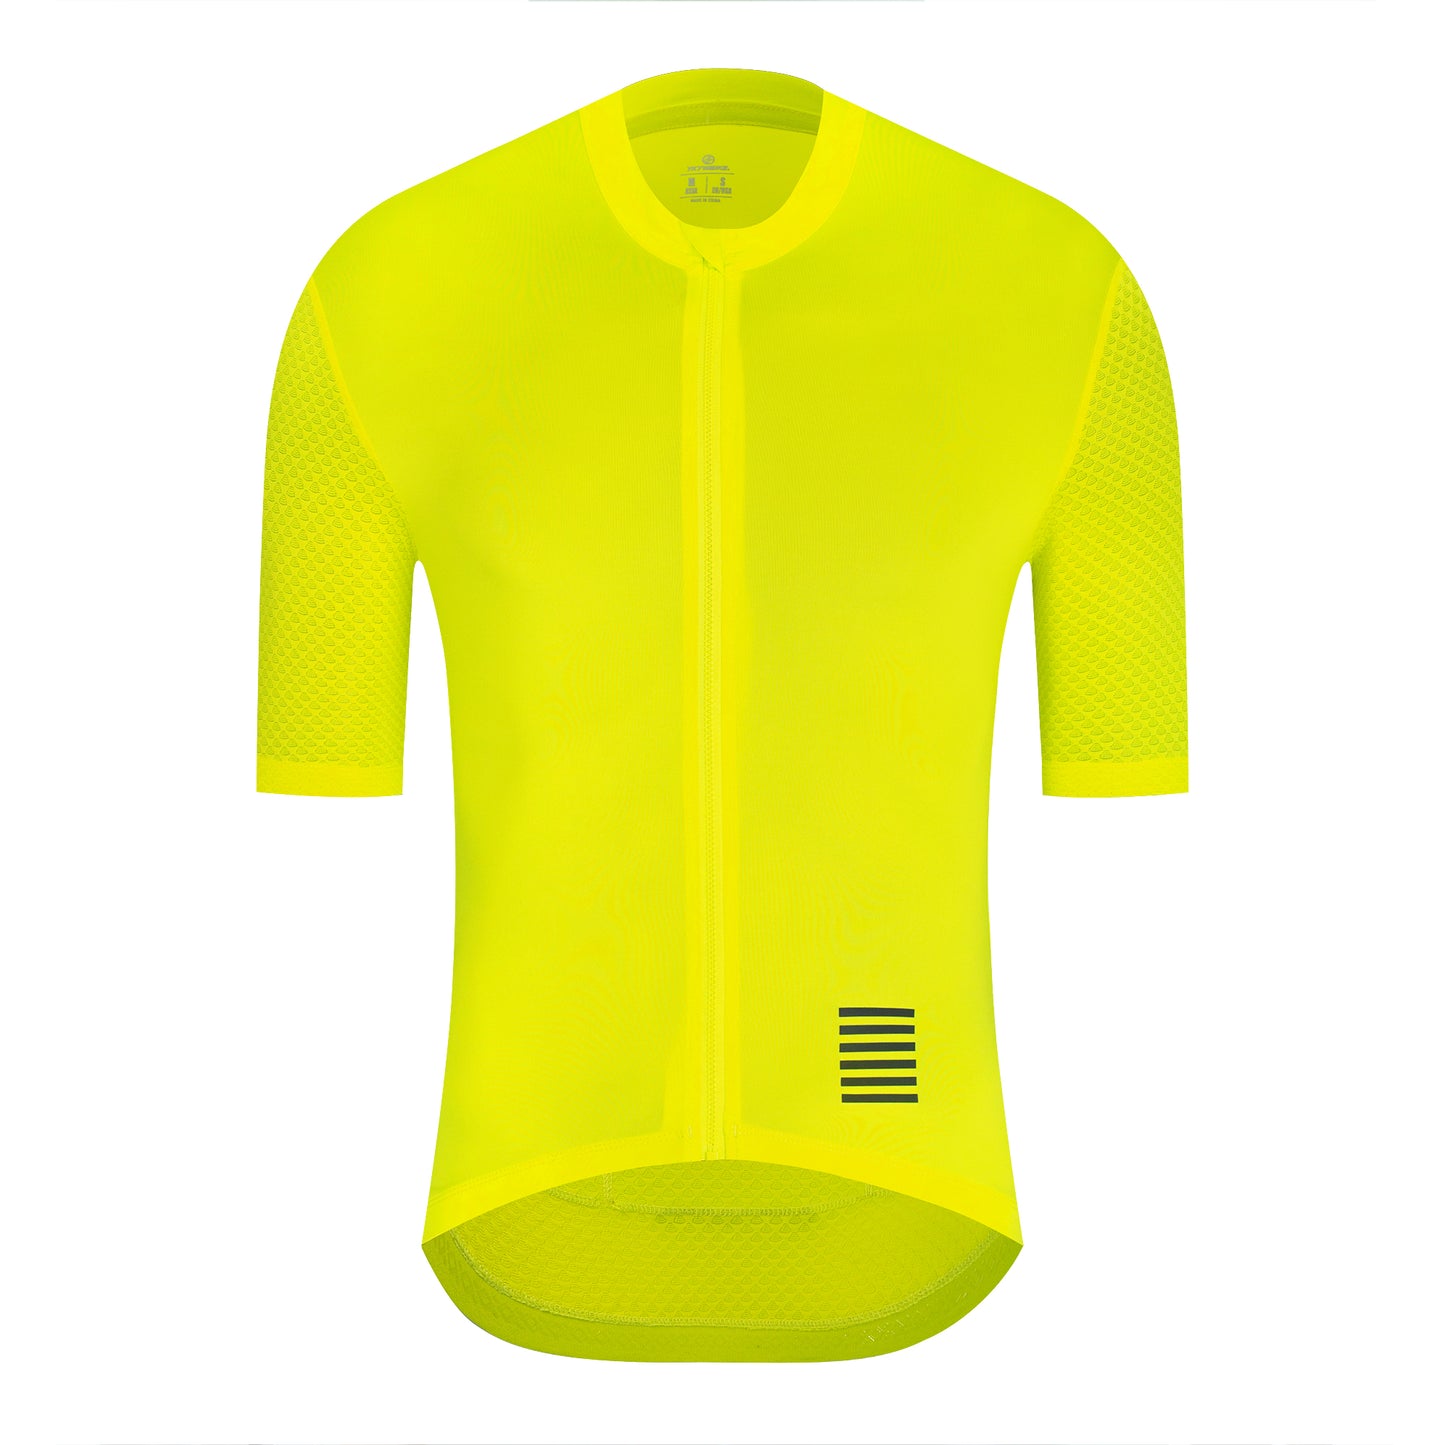 YKYW Men's Cycling Jersey Breathable Back Pocket Summer Reflective Dusk